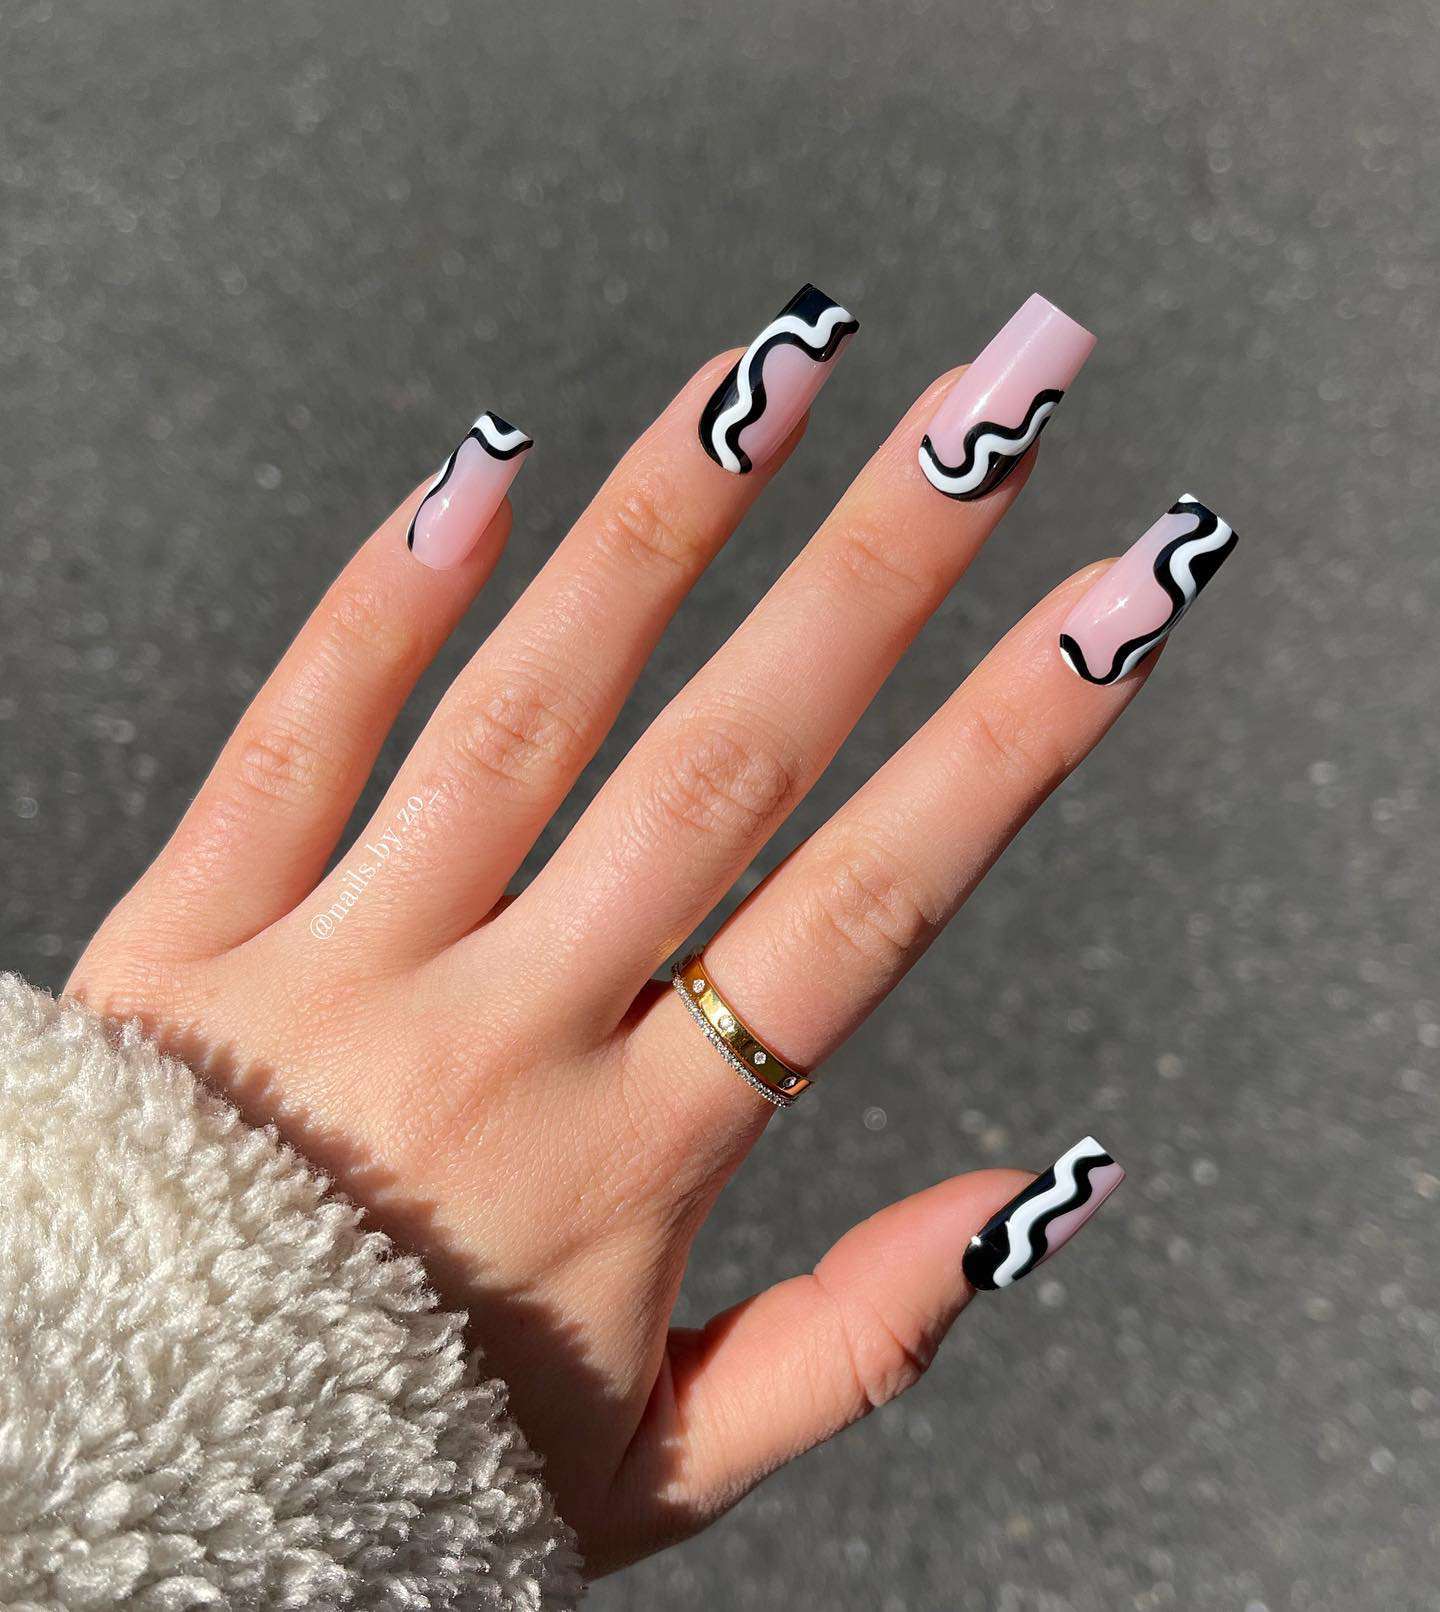 35 Nail Designs For 2022 You’ll Want To Try Immediately images 7